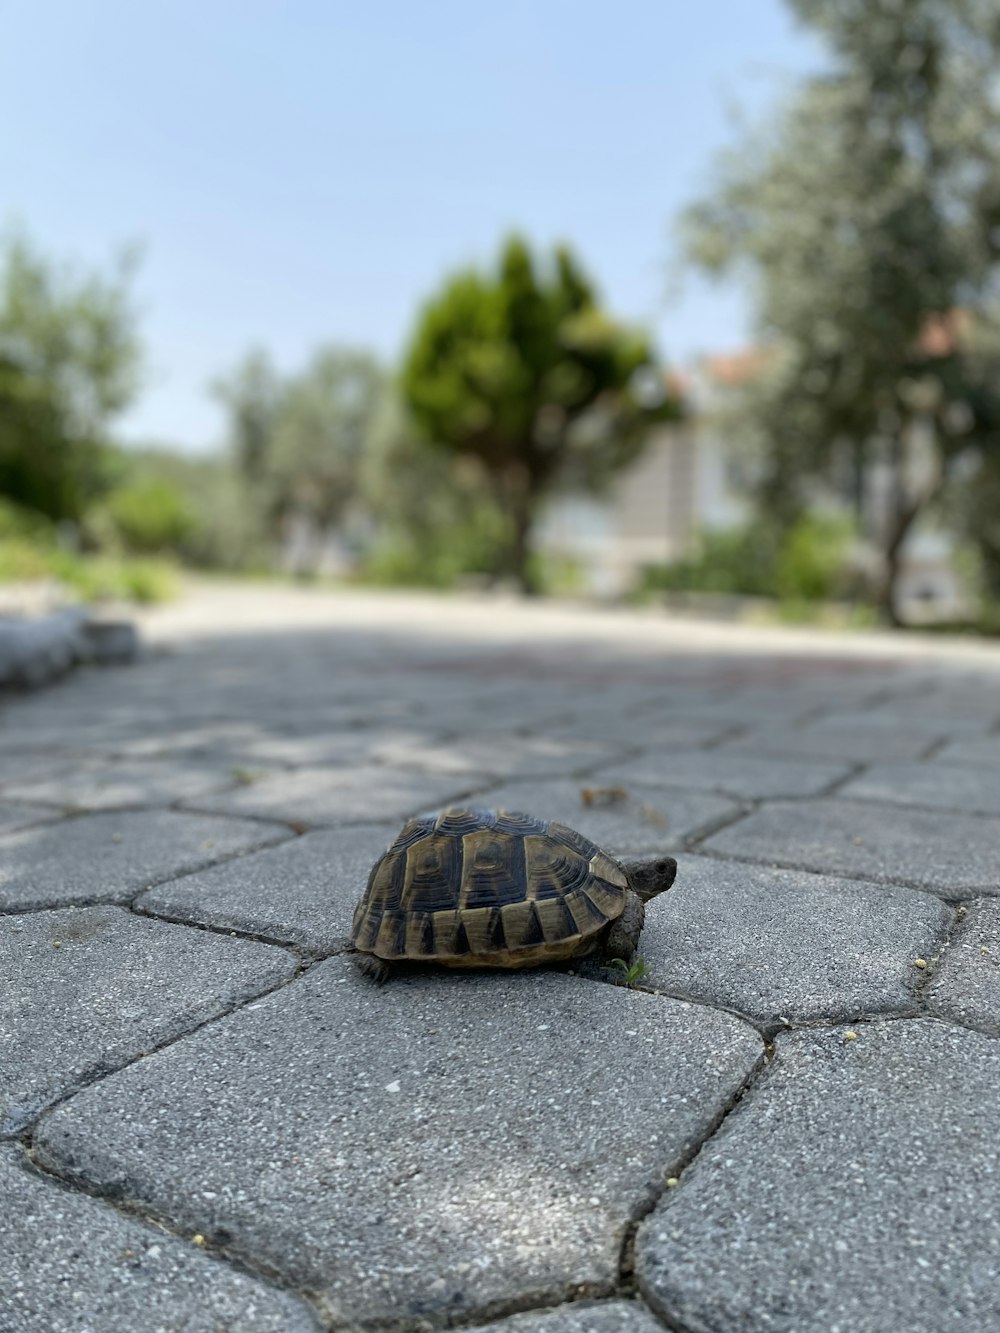 a turtle is sitting on the ground in the middle of the street